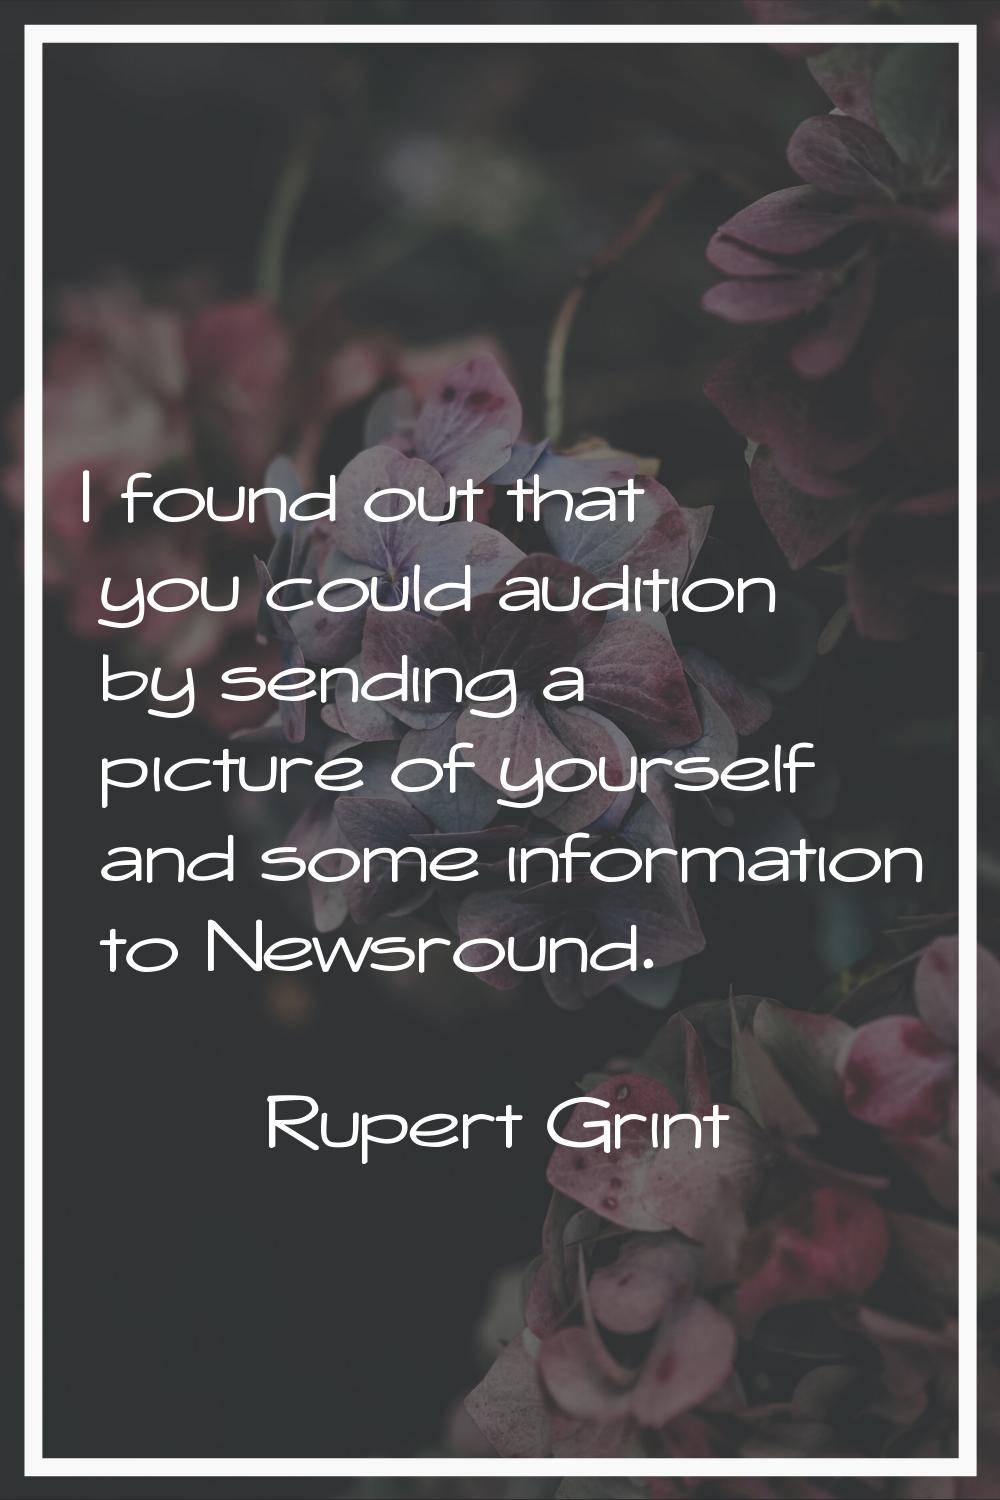 I found out that you could audition by sending a picture of yourself and some information to Newsro